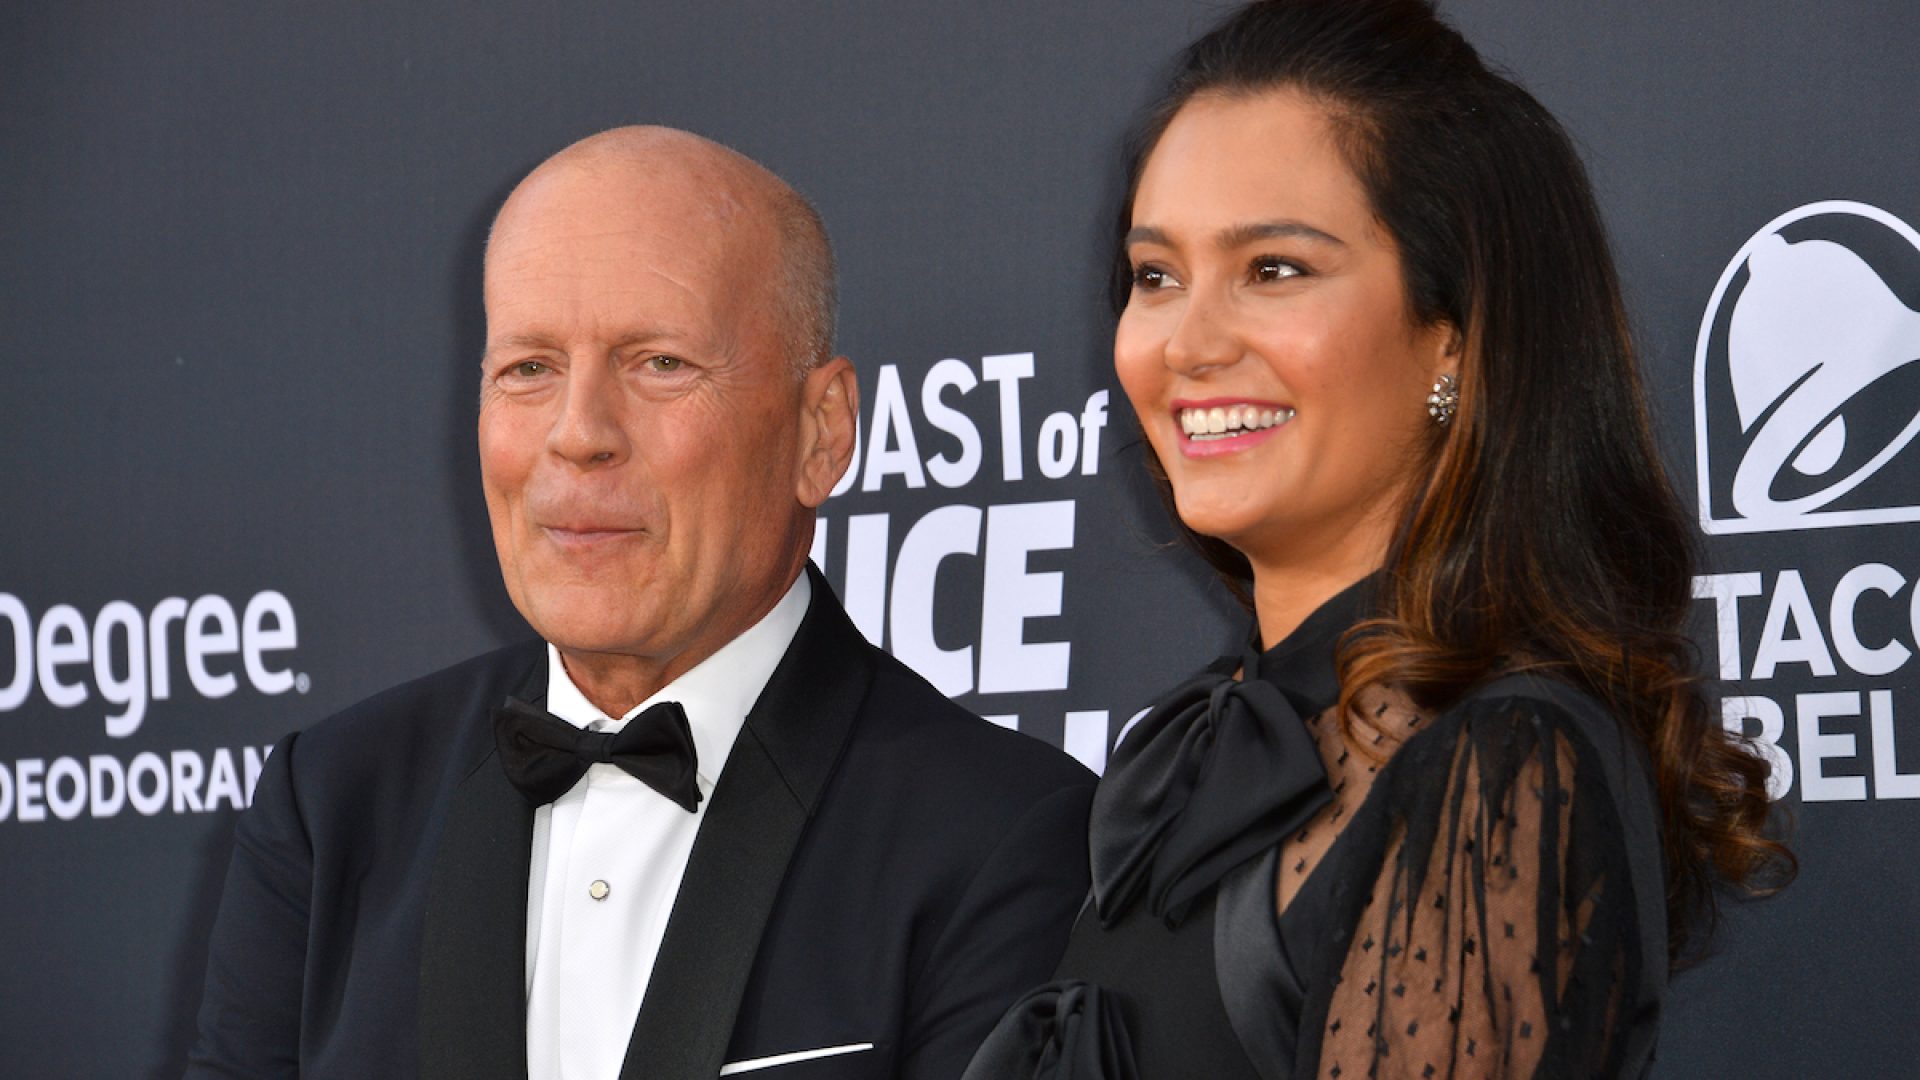 Bruce Willis’ Wife Tells Paparazzi to “Give Him His Space” in Emotional ...